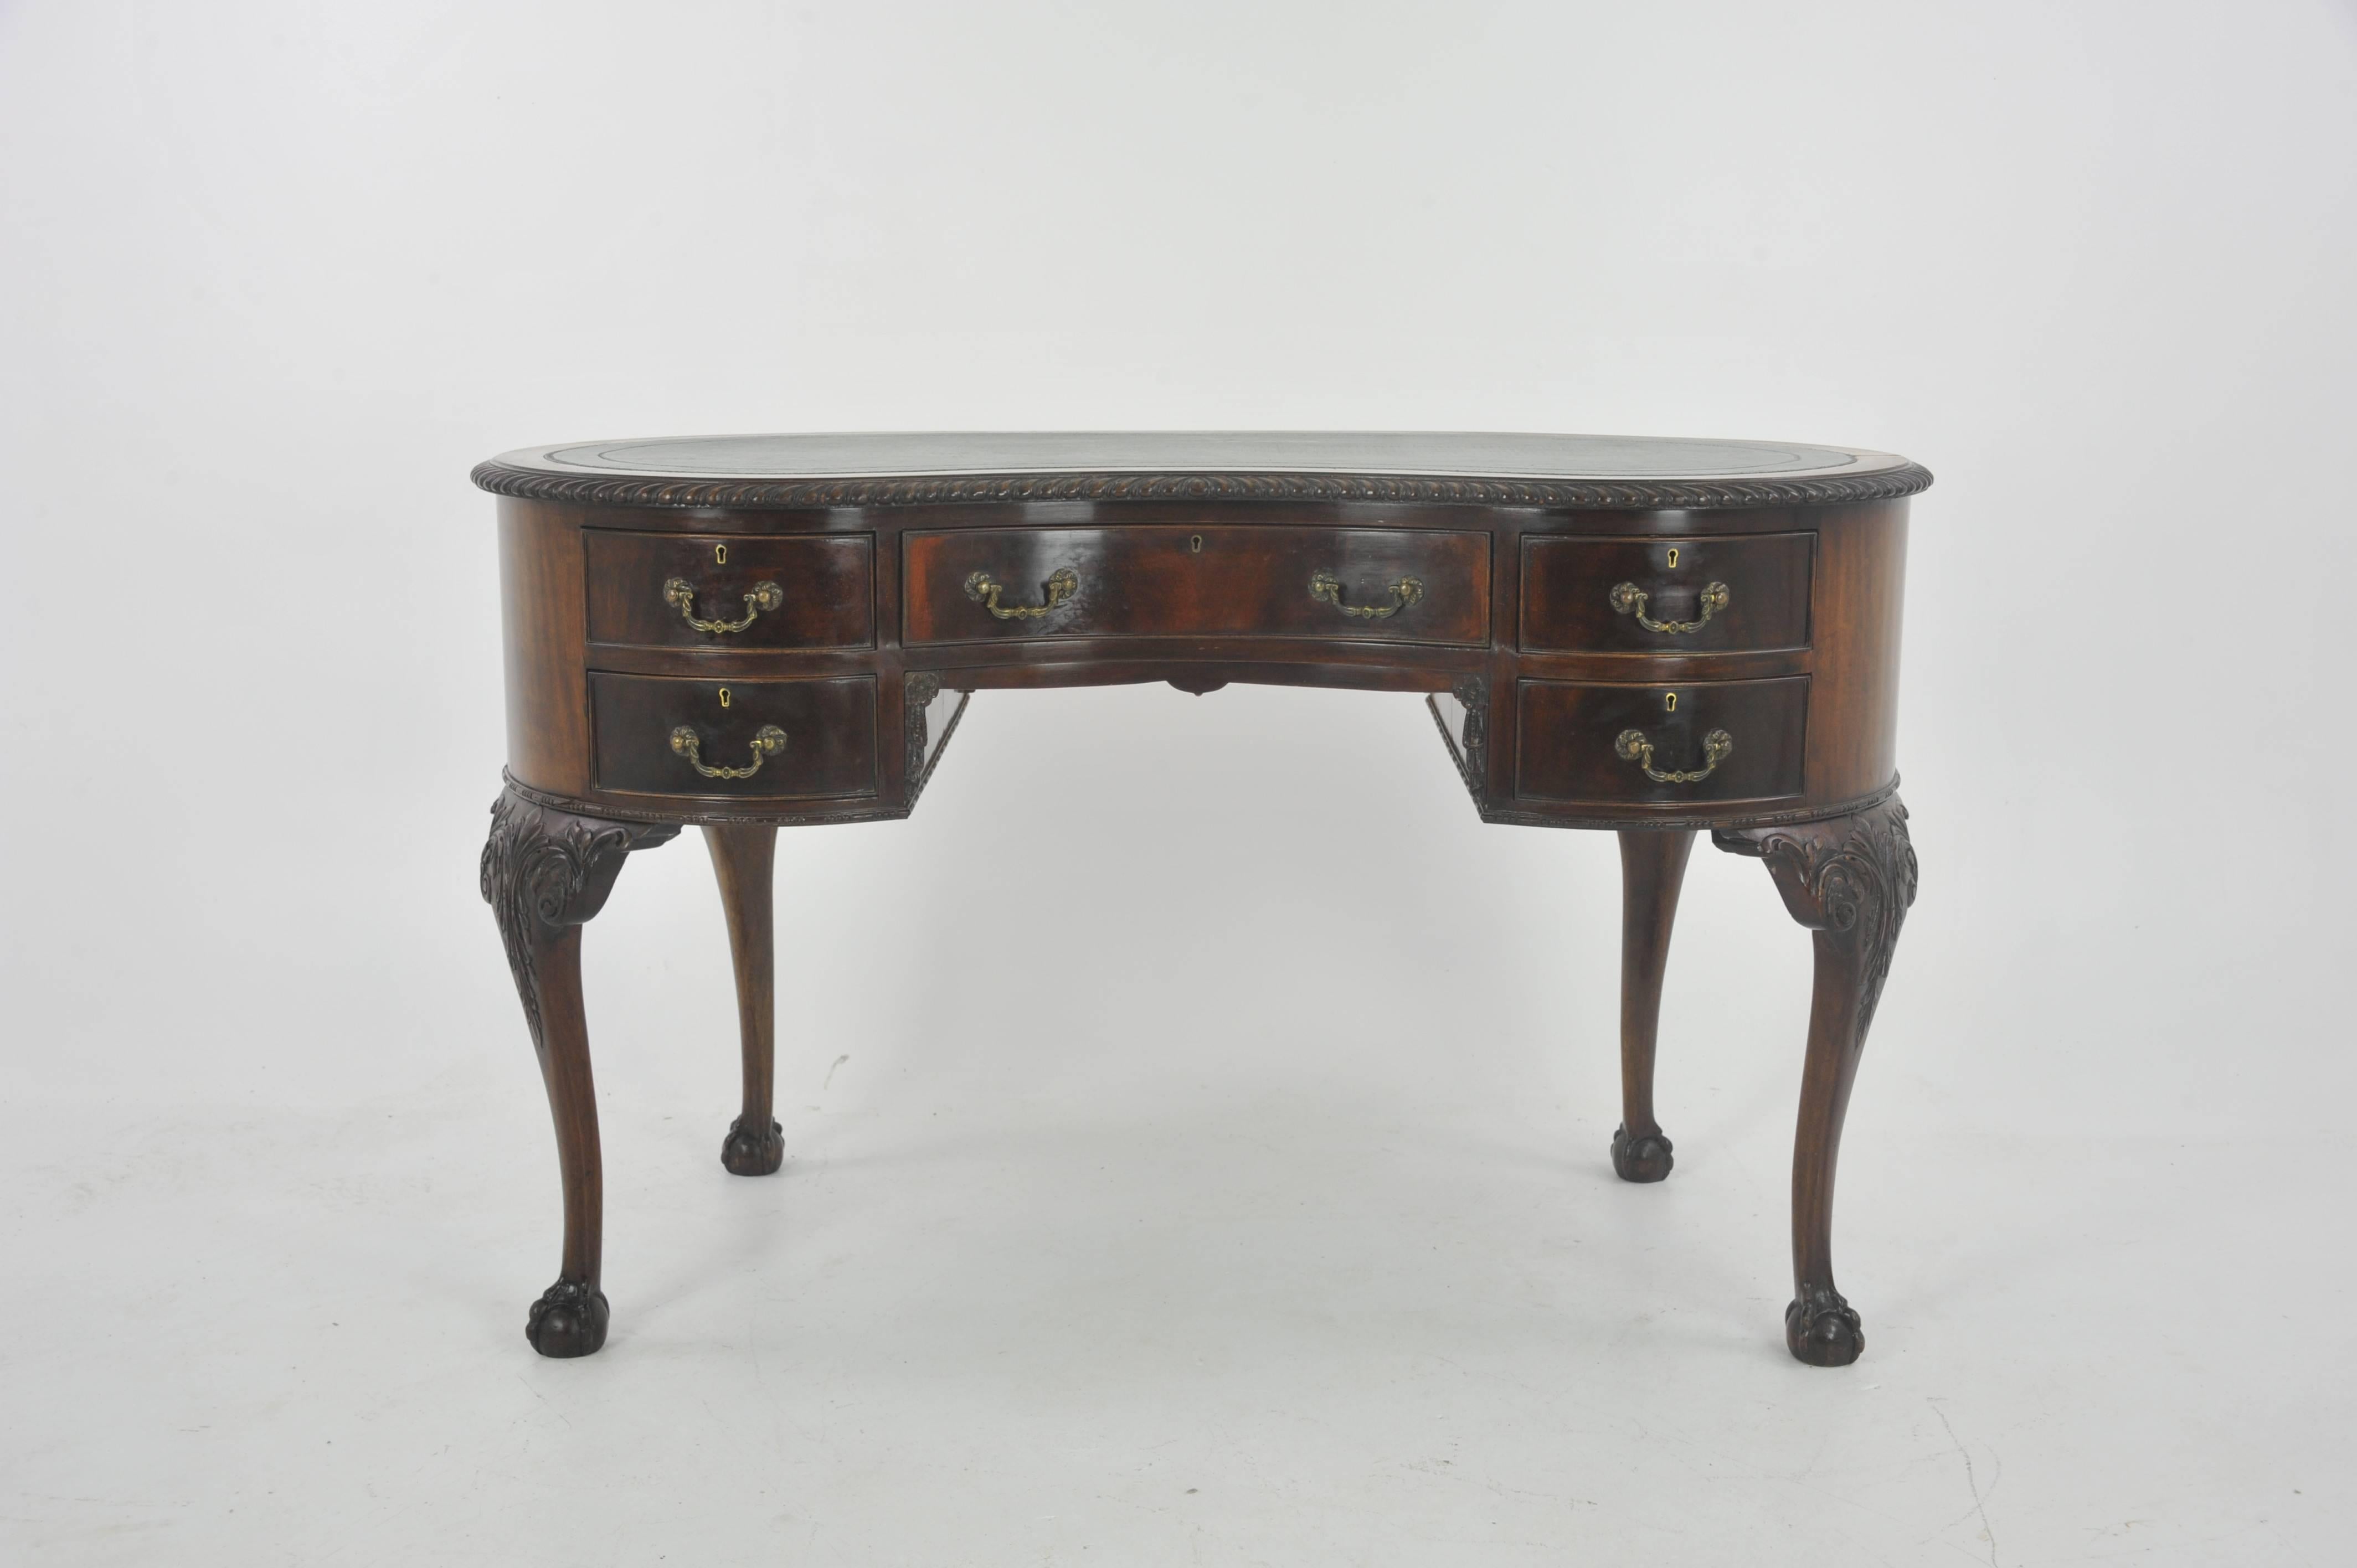 Kidney shaped desk, Walnut desk, Edwardian writing table, Scotland 1910, B967

Scotland 1910
Solid Walnut
Original finish
Green leather insert on shaped top over an arrangement of middle drawers flanked by two drawers on either side
Original brass